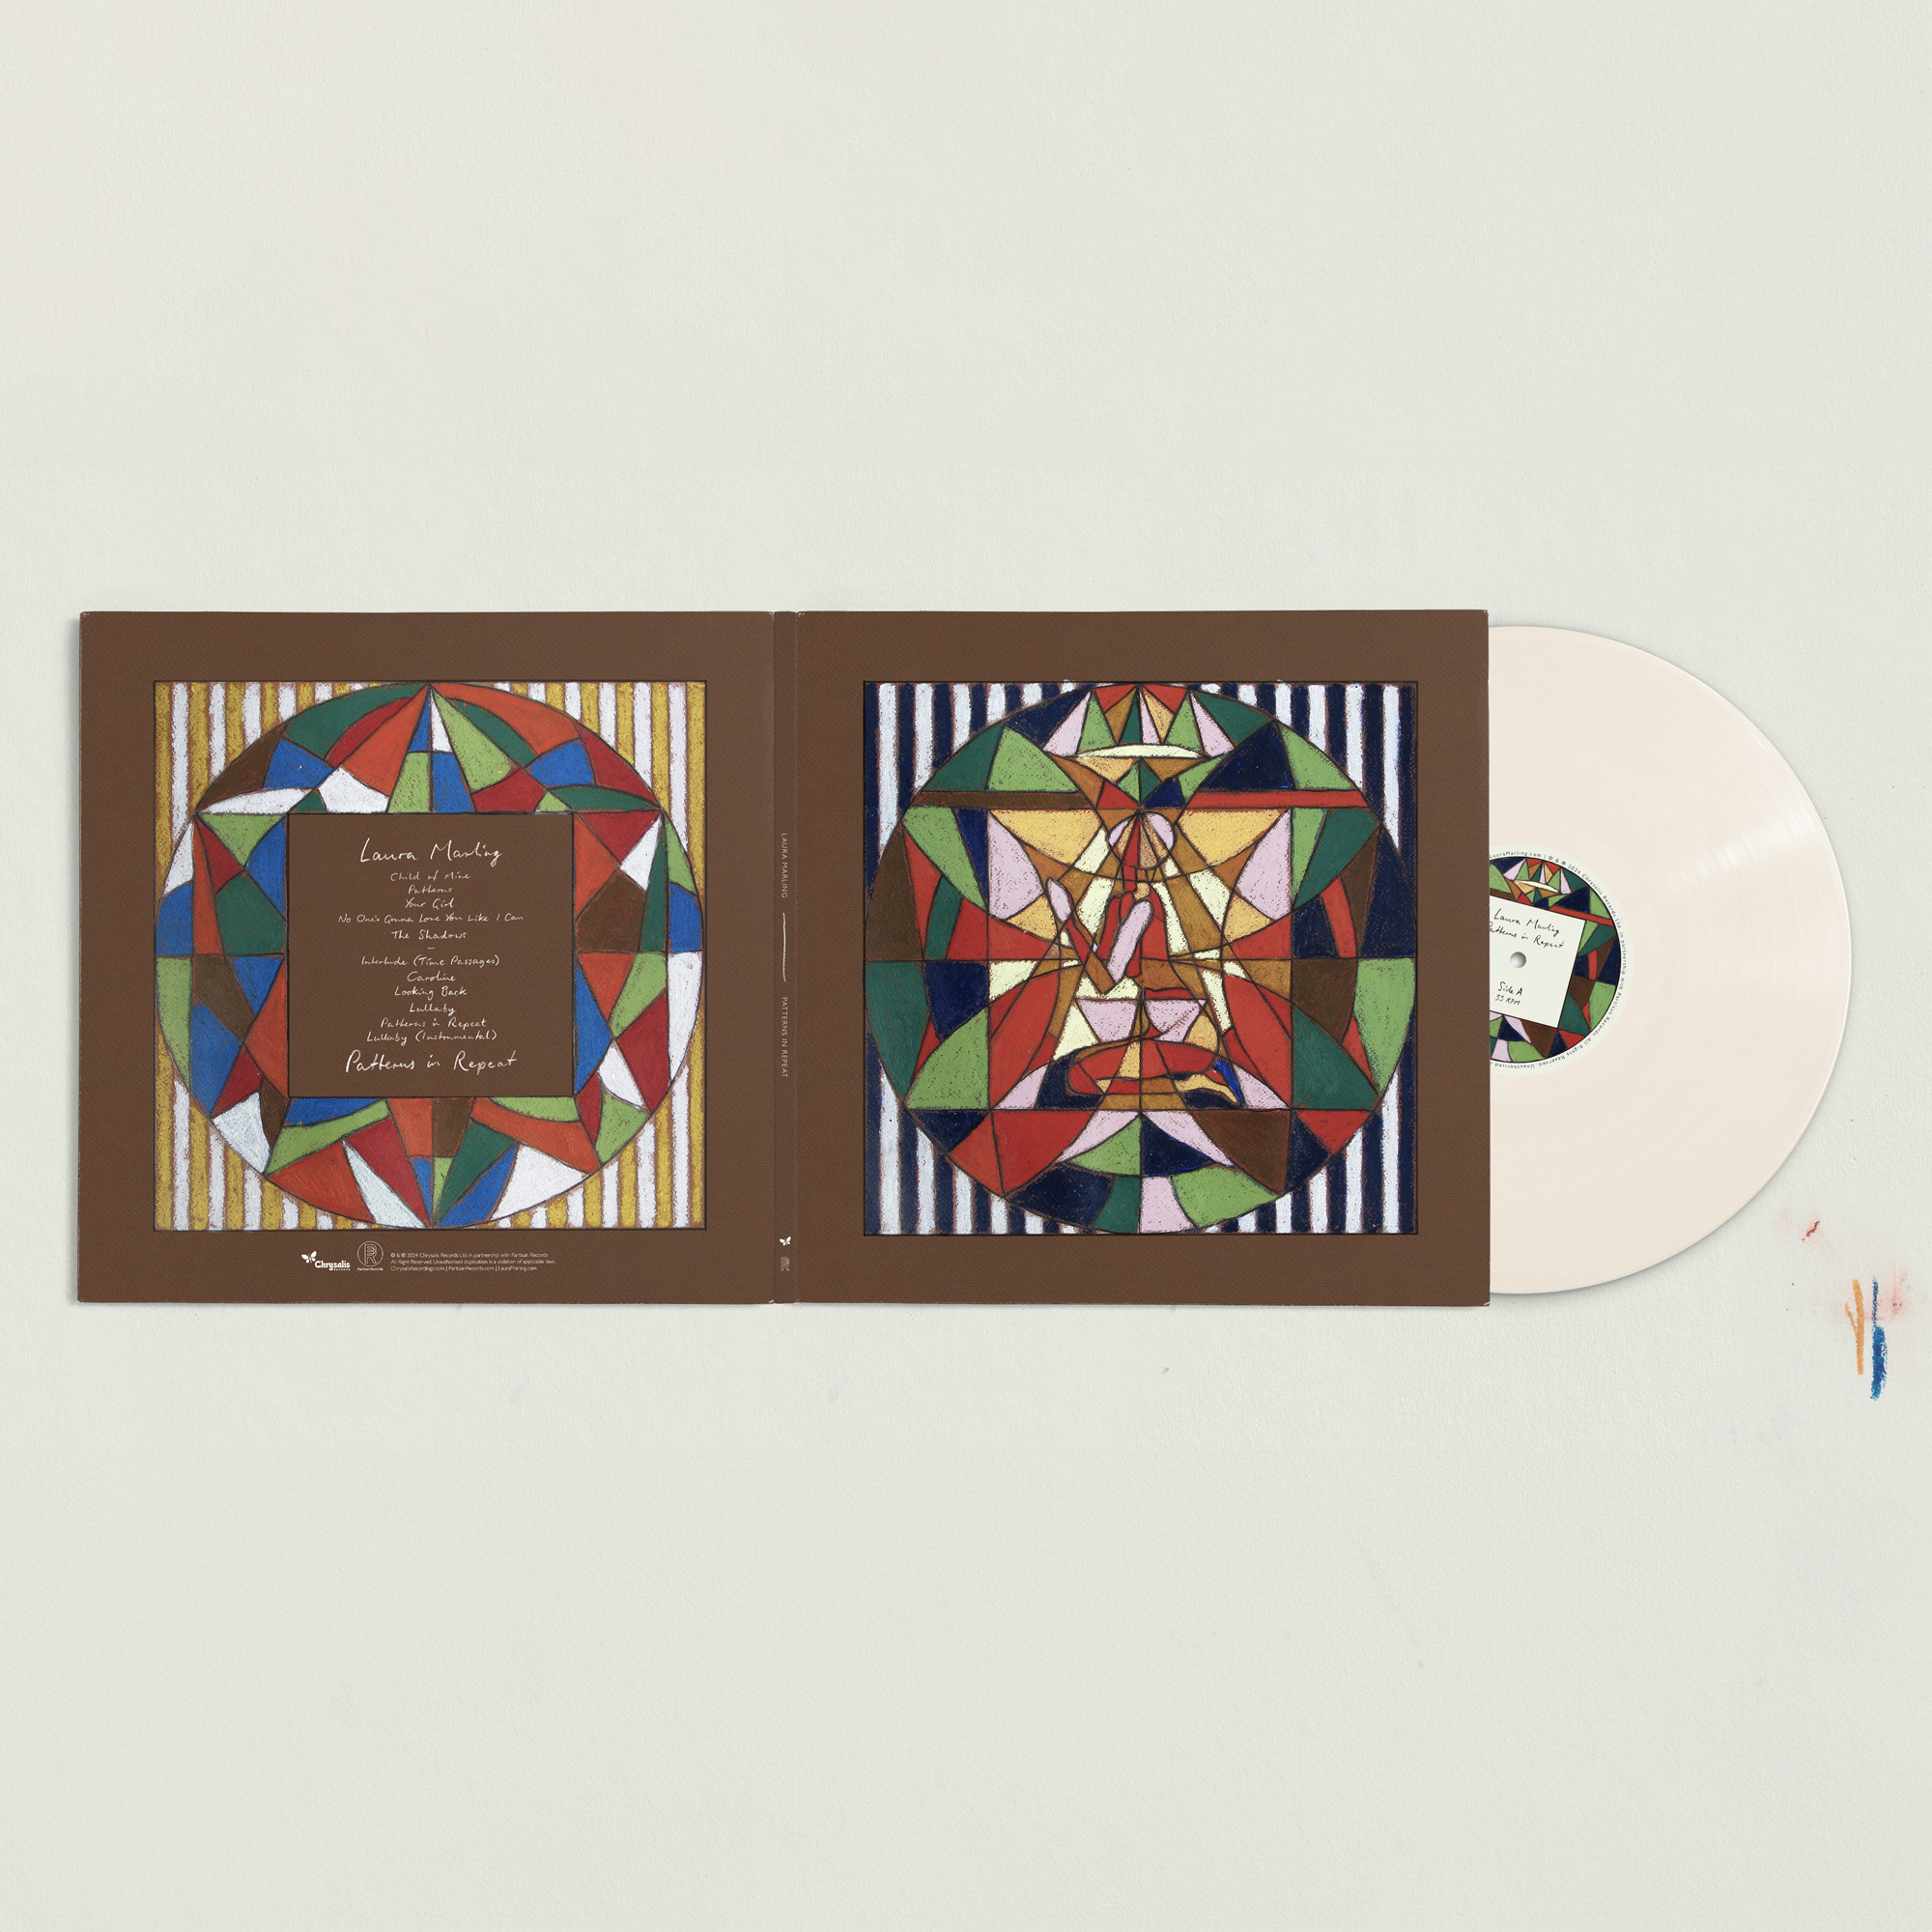 Laura Marling - Patterns in Repeat: Limited Cream Vinyl LP